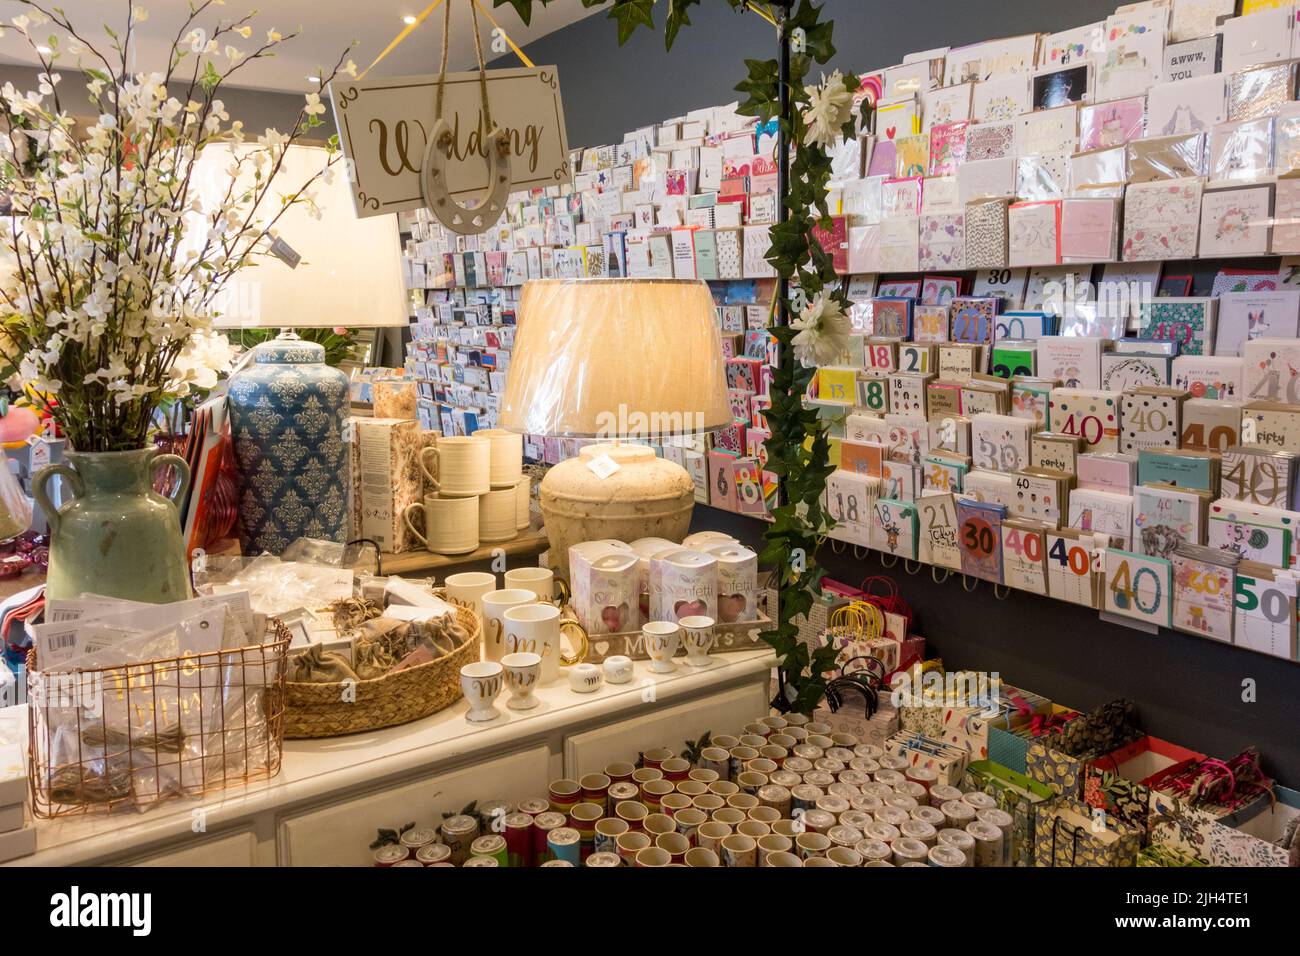 Interior of gifts and cards shop, Tetbury, Gloucestershire, UK Stock Photo